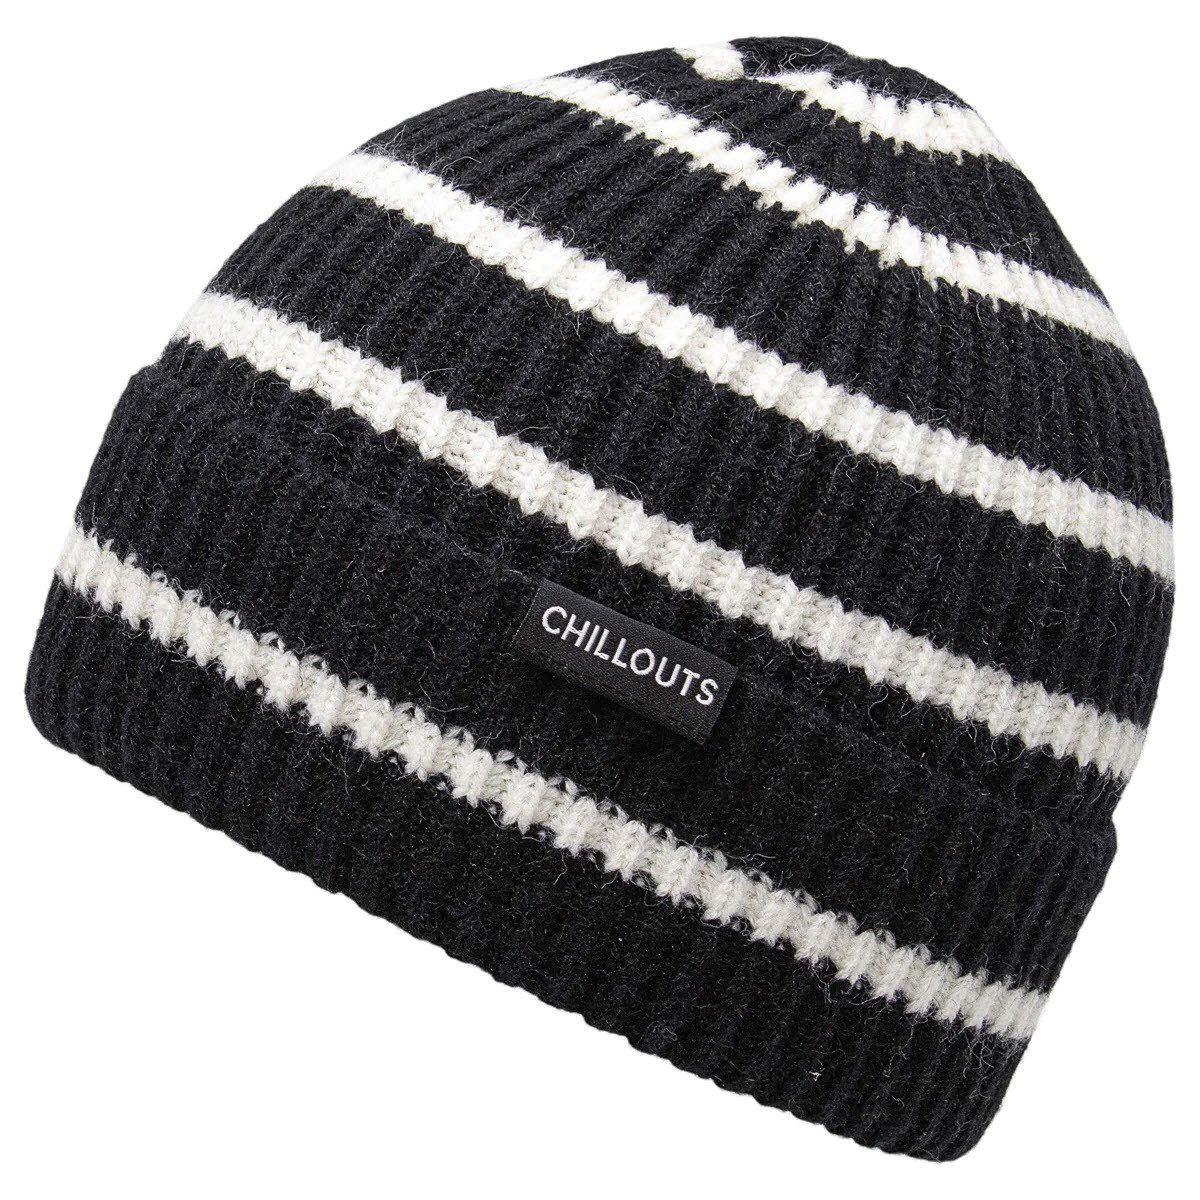 JETTE chillouts Beanie HAT